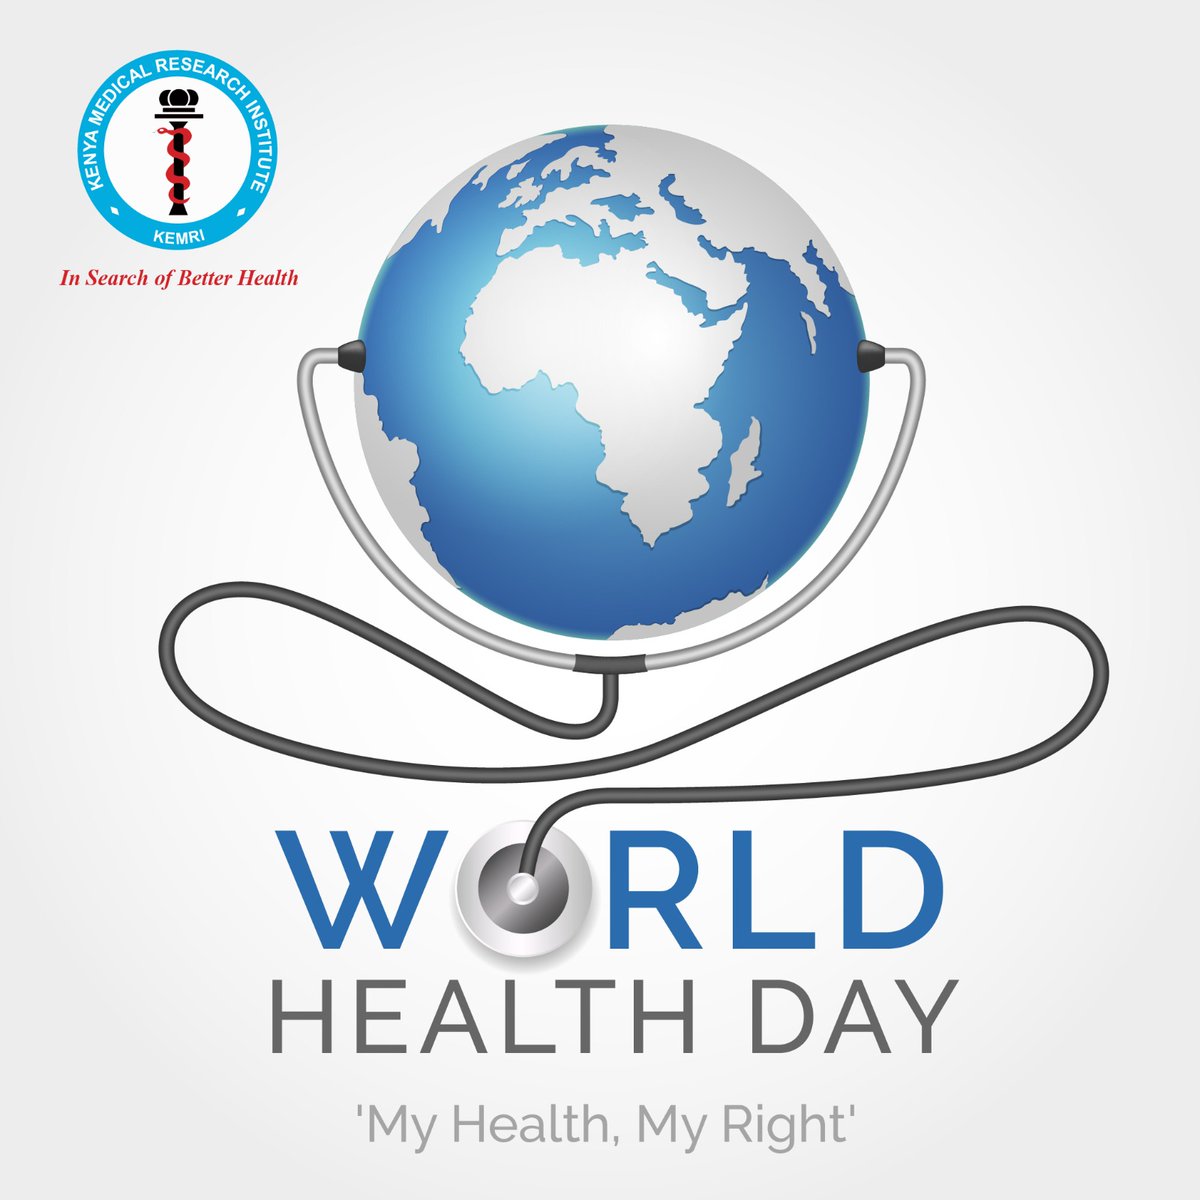 On #WorldHealthDay, we reaffirm our commitment to advancing human health through research, innovation, and collaboration. Together, let's continue our efforts to drive positive change, improve health outcomes, and create a healthier future for all. #HealthForAll #MyHealthMyRight